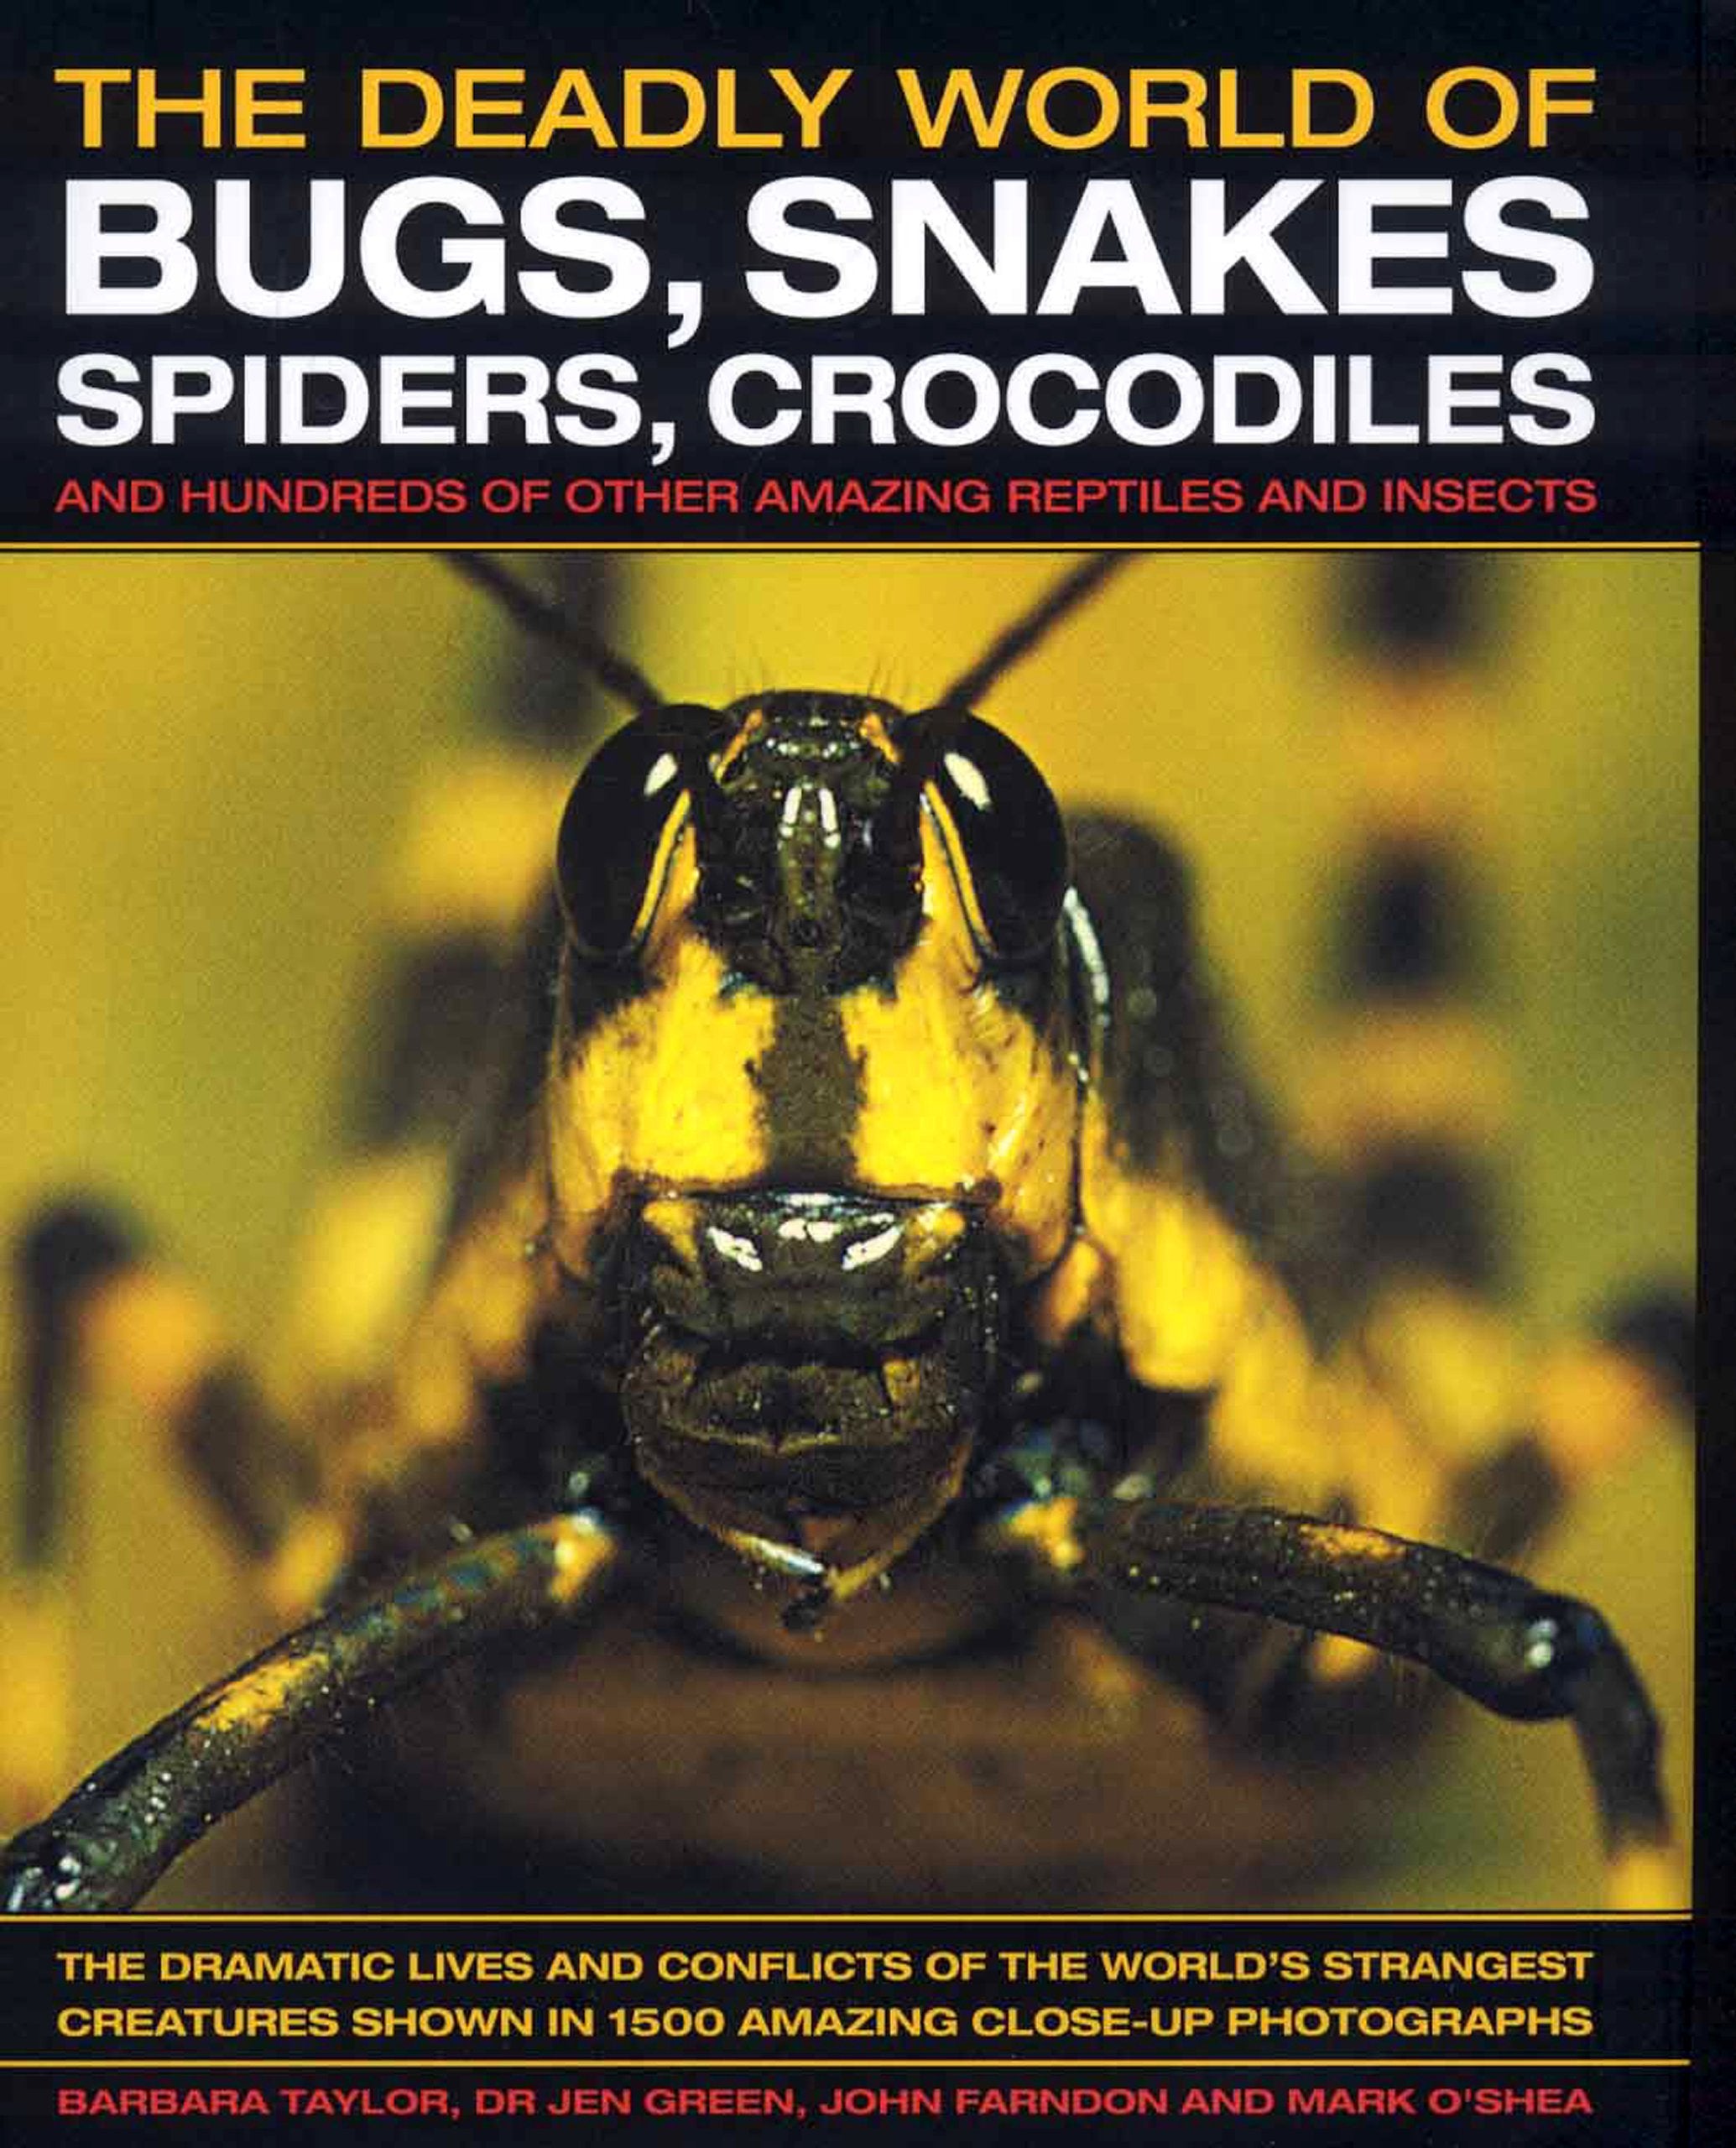 The Deadly World of Bugs, Snakes, Spiders, Crocodiles: And Hundreds of Other Amazing Reptiles and Insects Hardcover